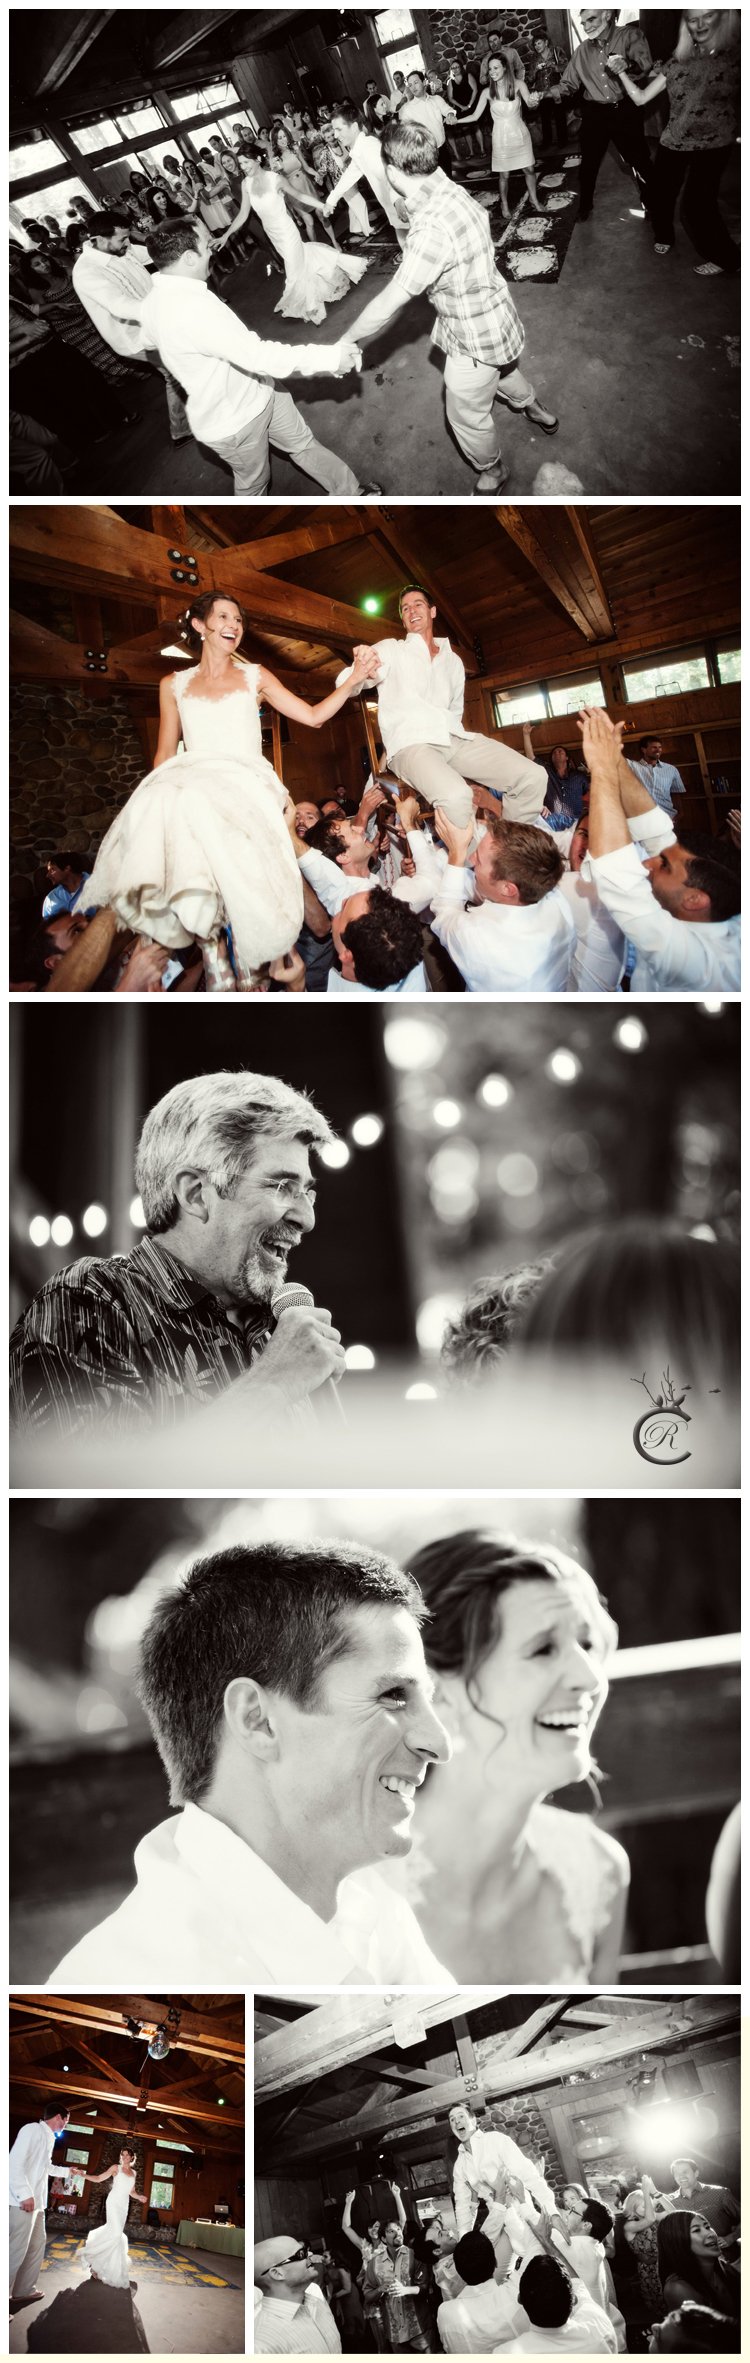 Dancing and speeches | Carrie Richards Photography